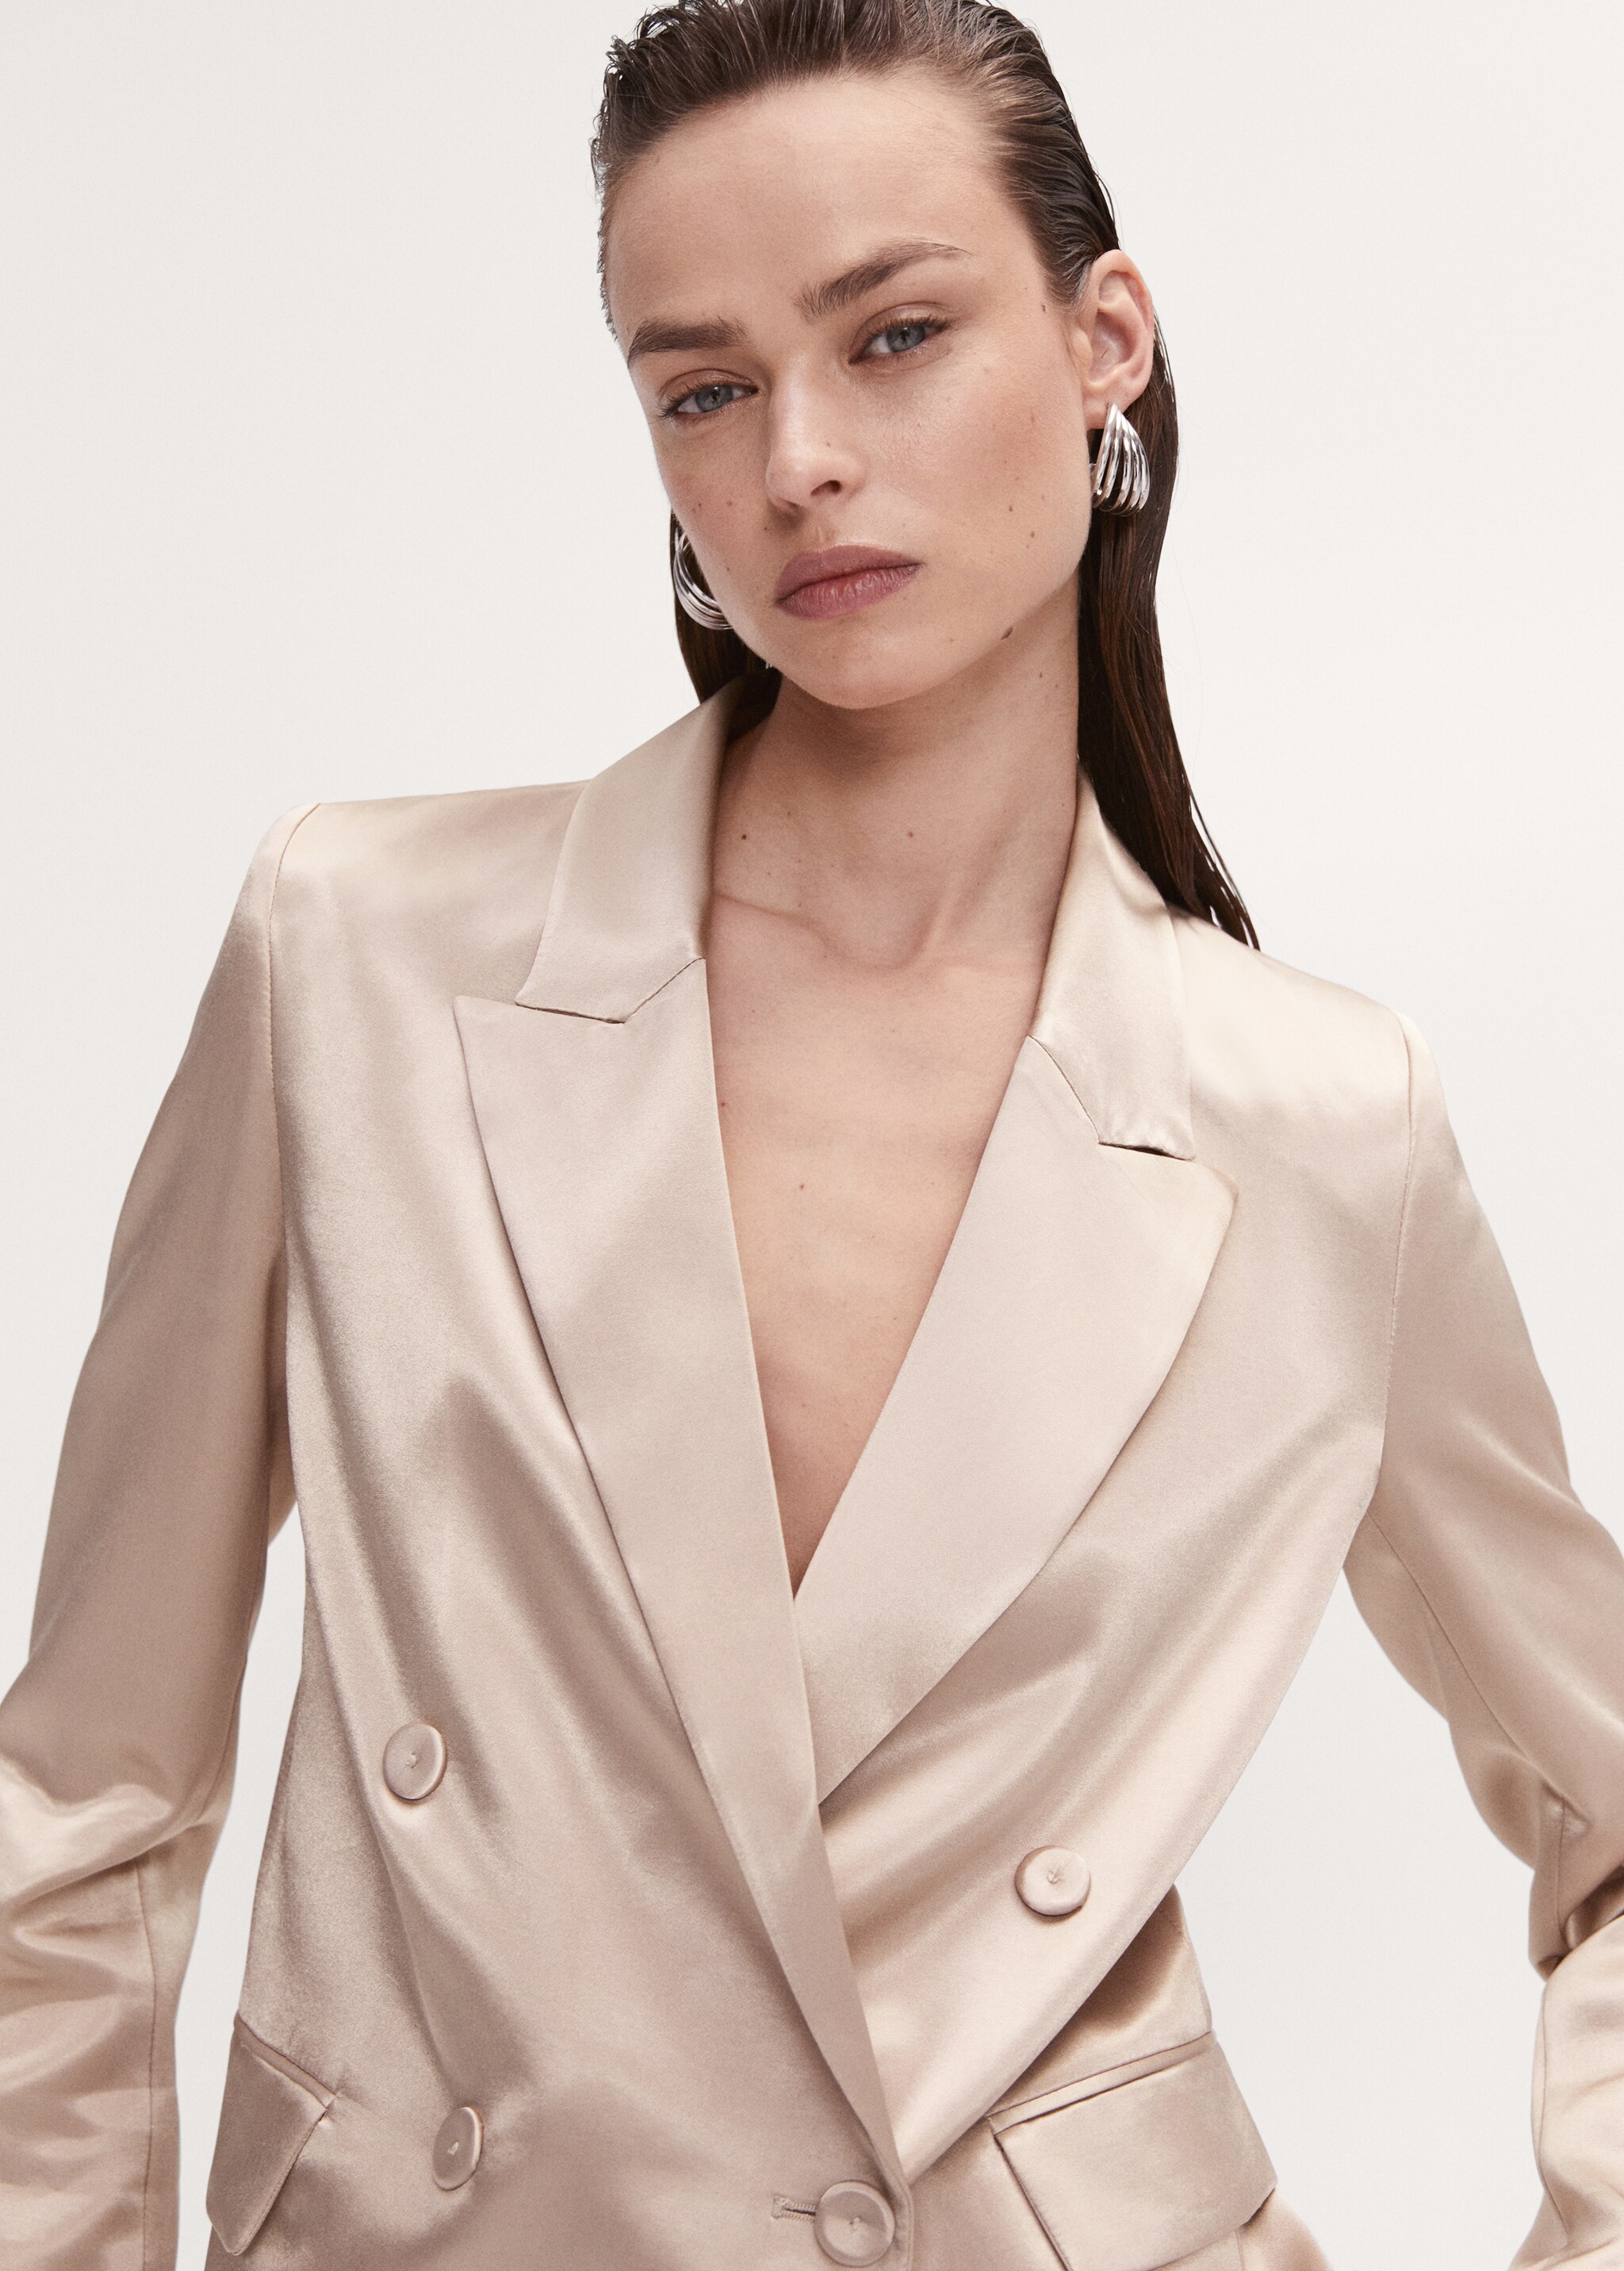 Satin-finish suit jacket - Details of the article 1